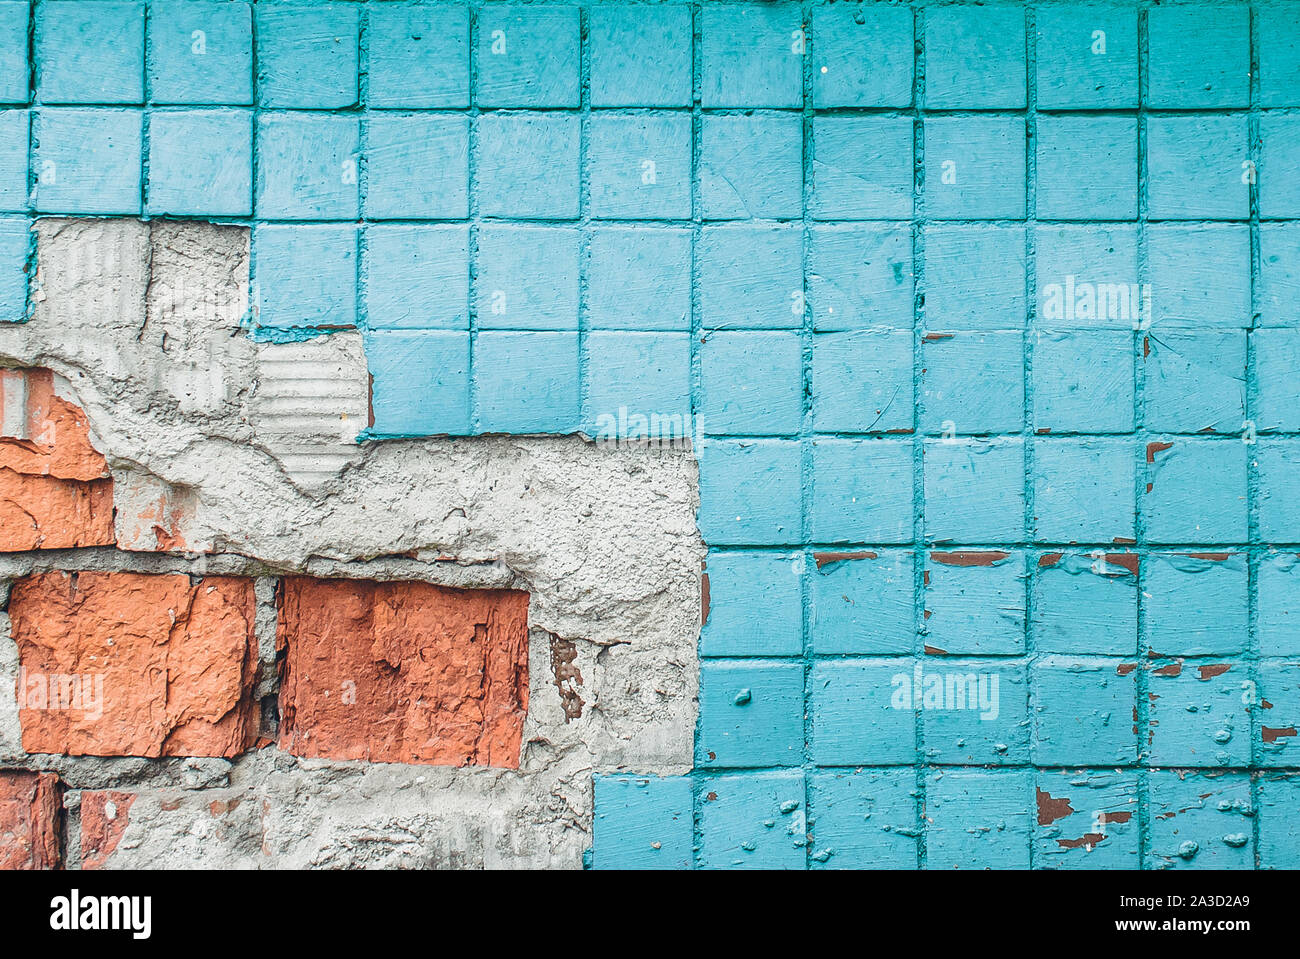 Texture of old blue tile wall. Background of Wall fragment with broken tile and bricks Stock Photo